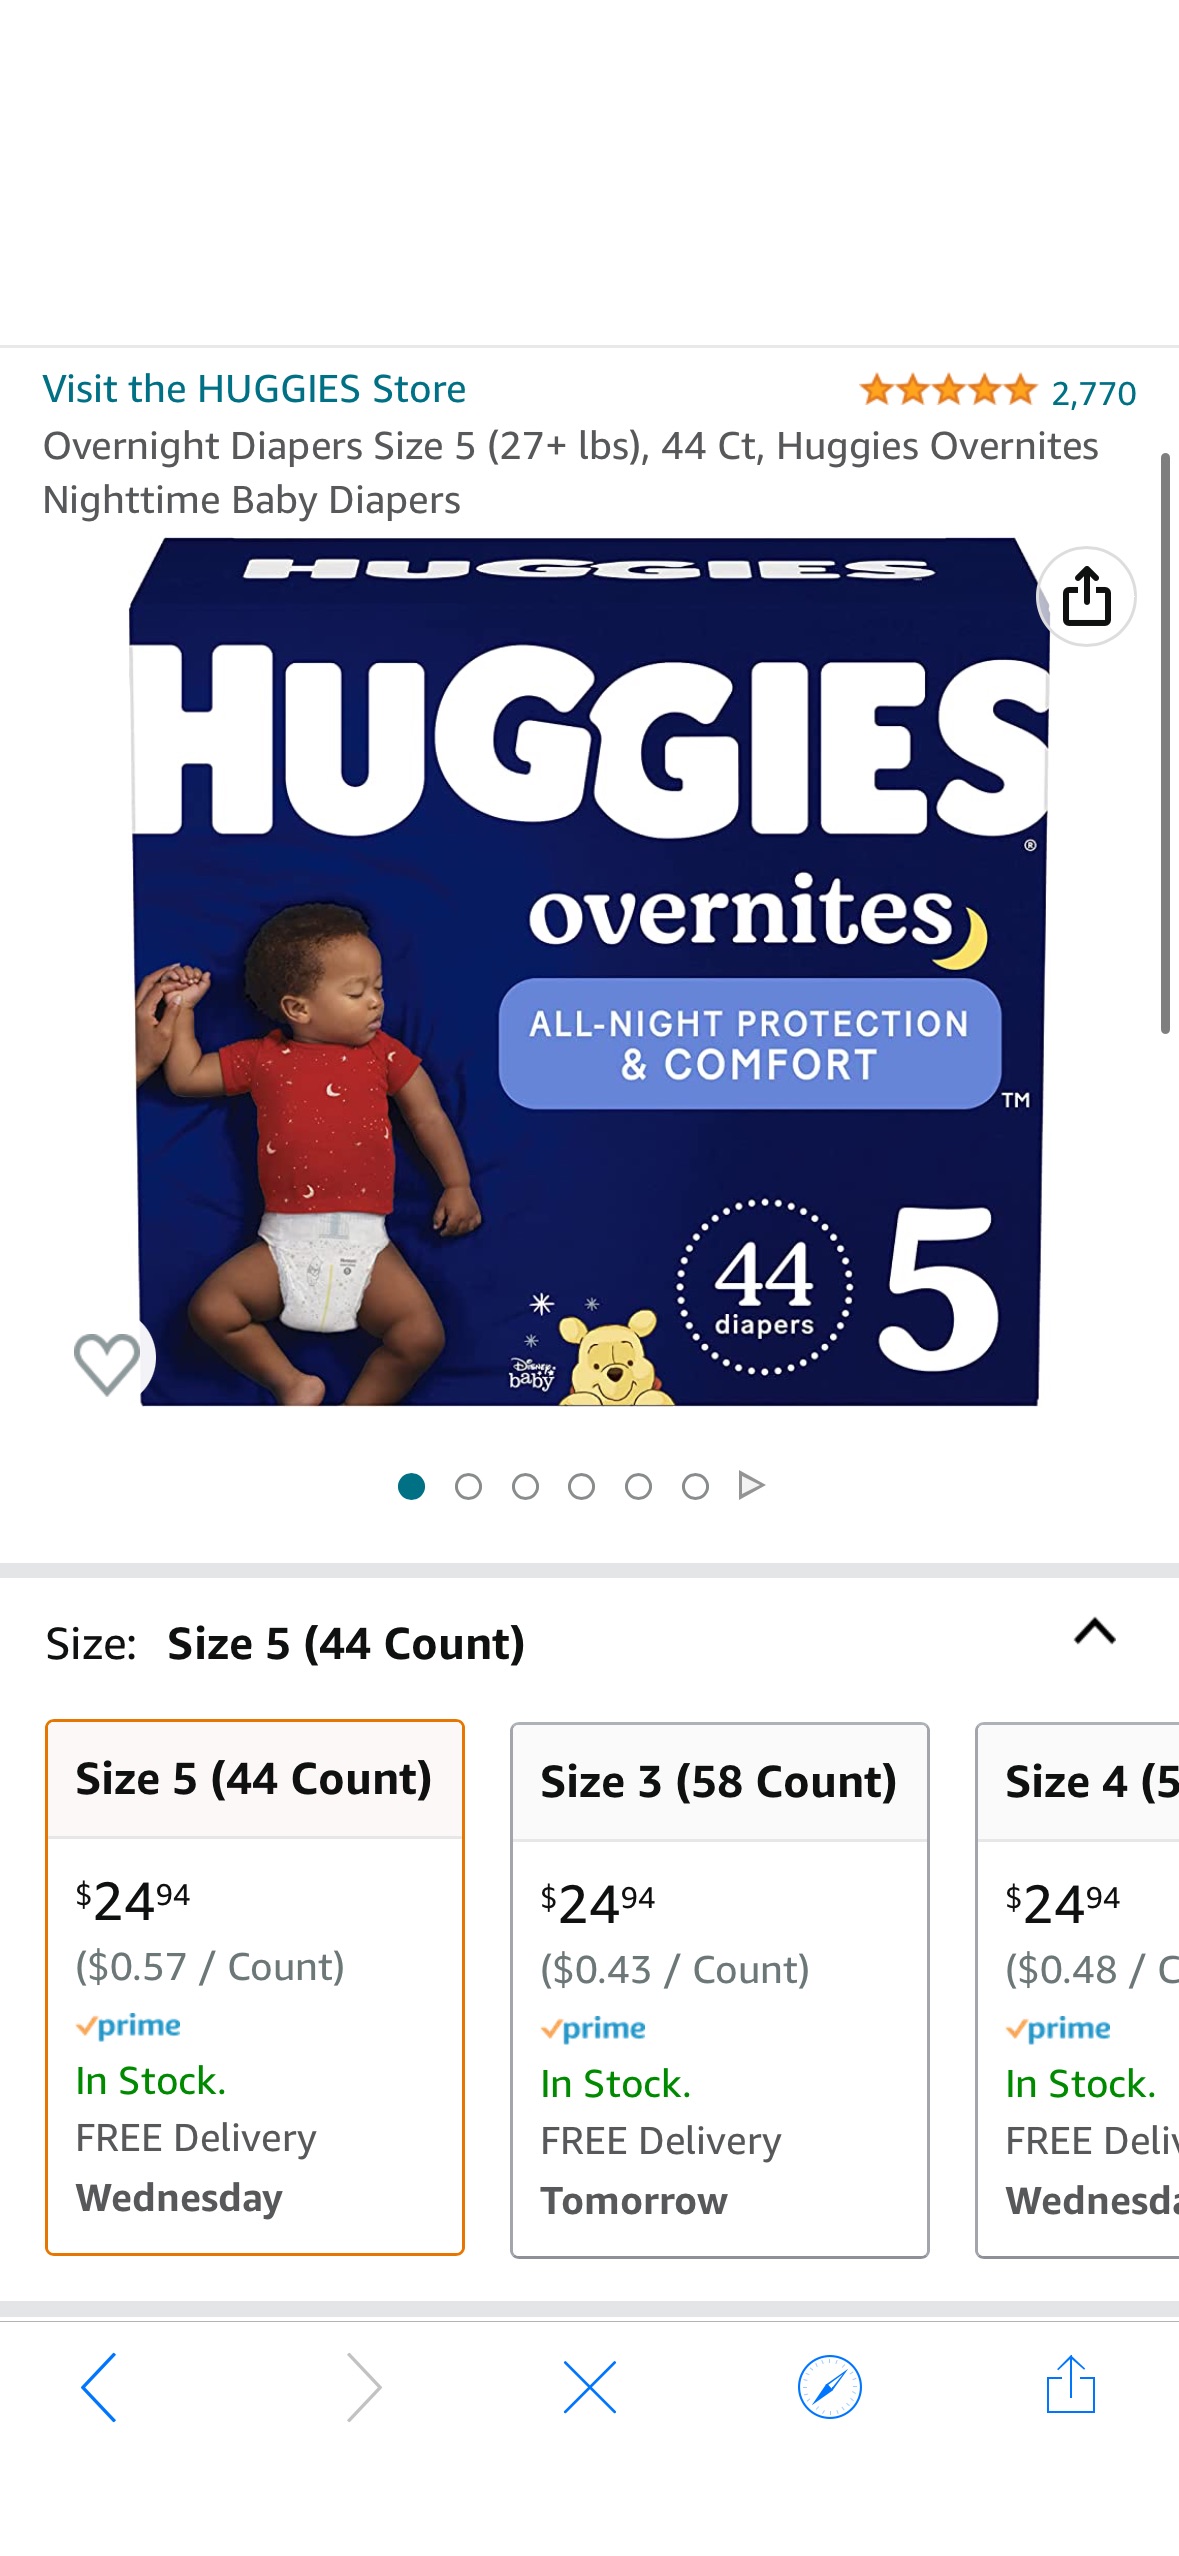 Amazon.com: Overnight Diapers Size 5 (27+ lbs), 44 Ct, Huggies Overnites Nighttime Baby Diapers : Everything Else尿不湿